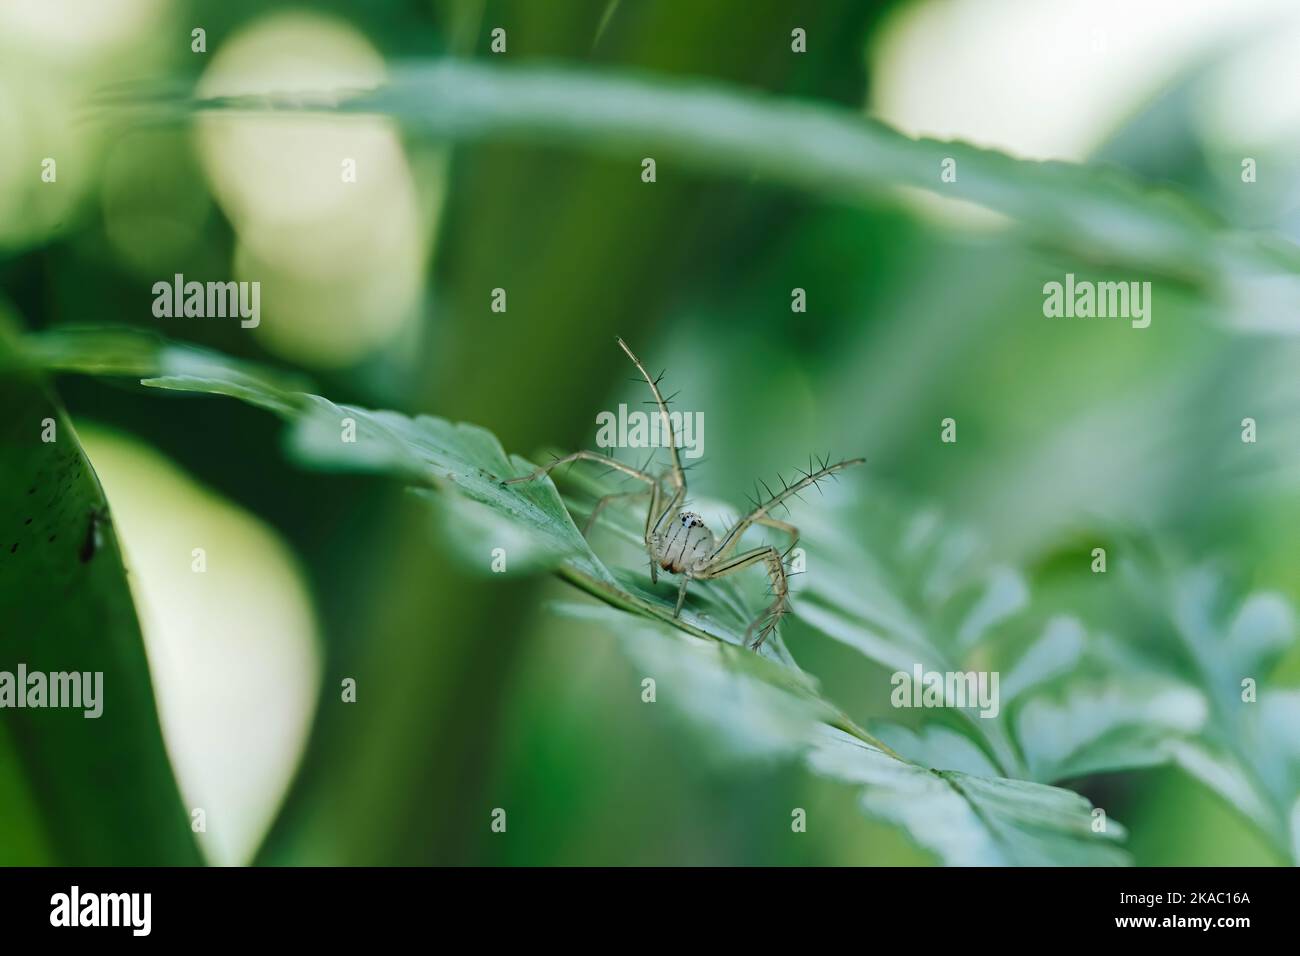 Macro shot of a small transparent spider on a green leaf is on standby to protect itself with blurred background Stock Photo